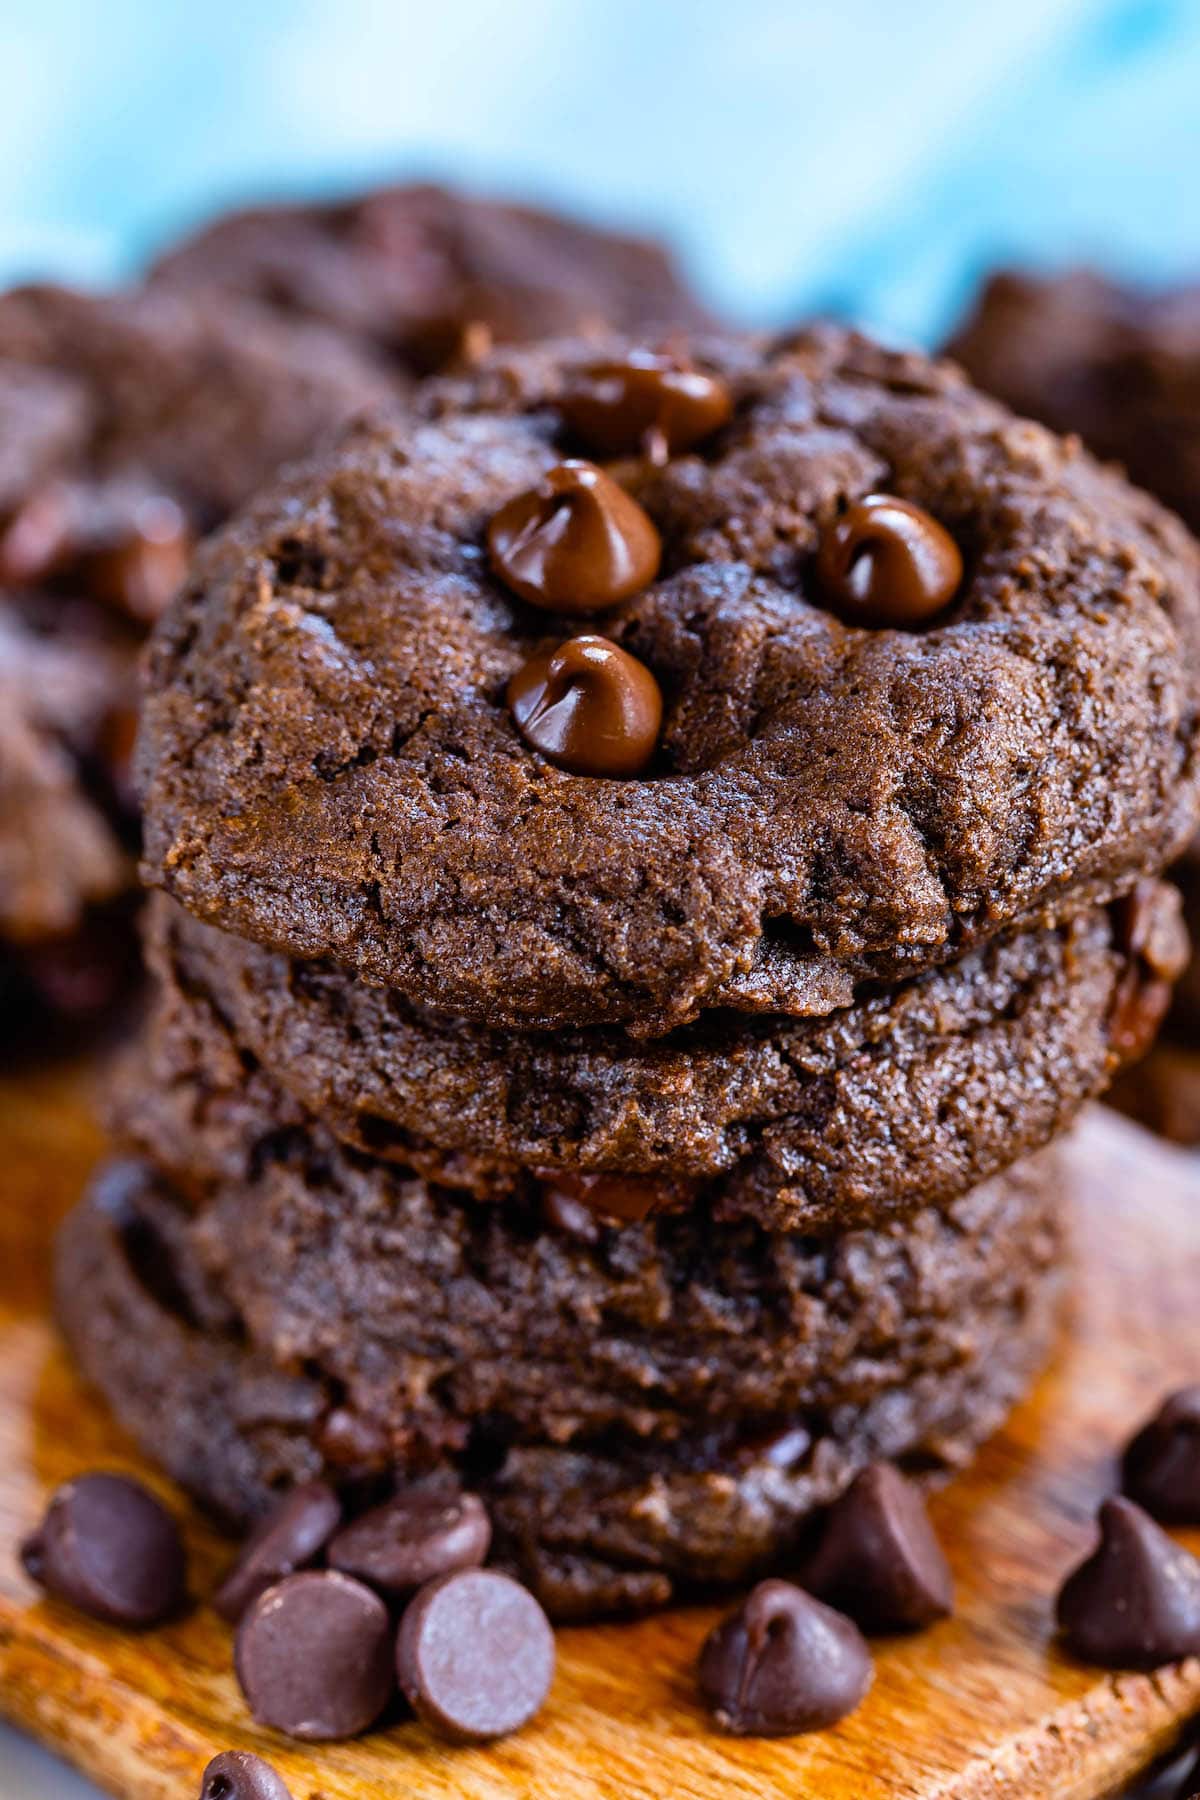 stacked chocolate cookies with chocolate chips baked in.